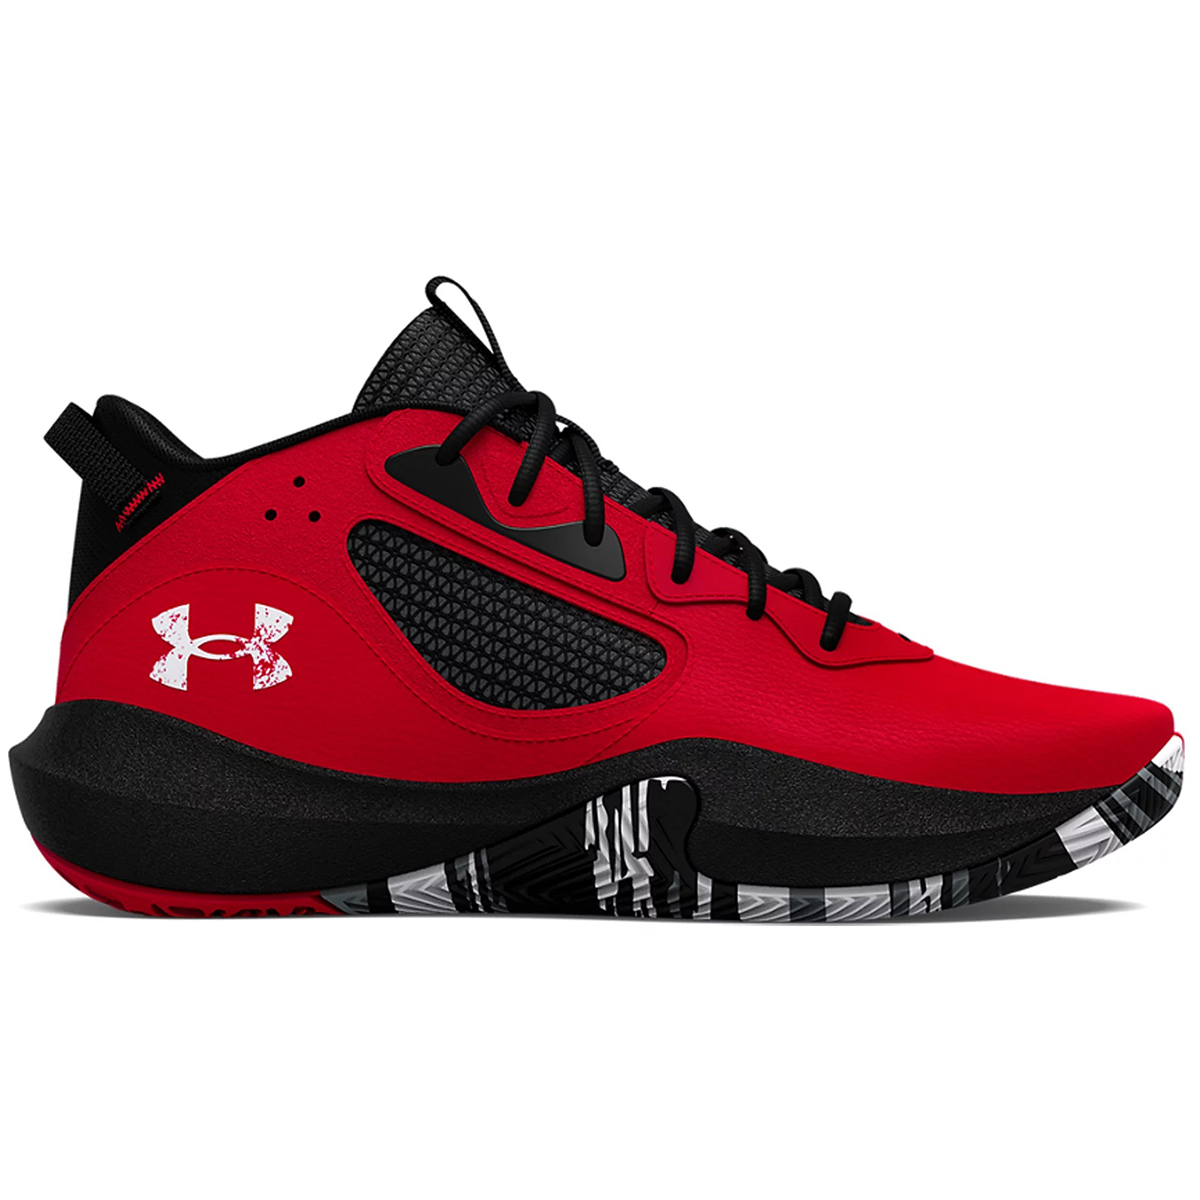 Under Armour Men's Ua Lockdown 6 Basketball Shoes, RED